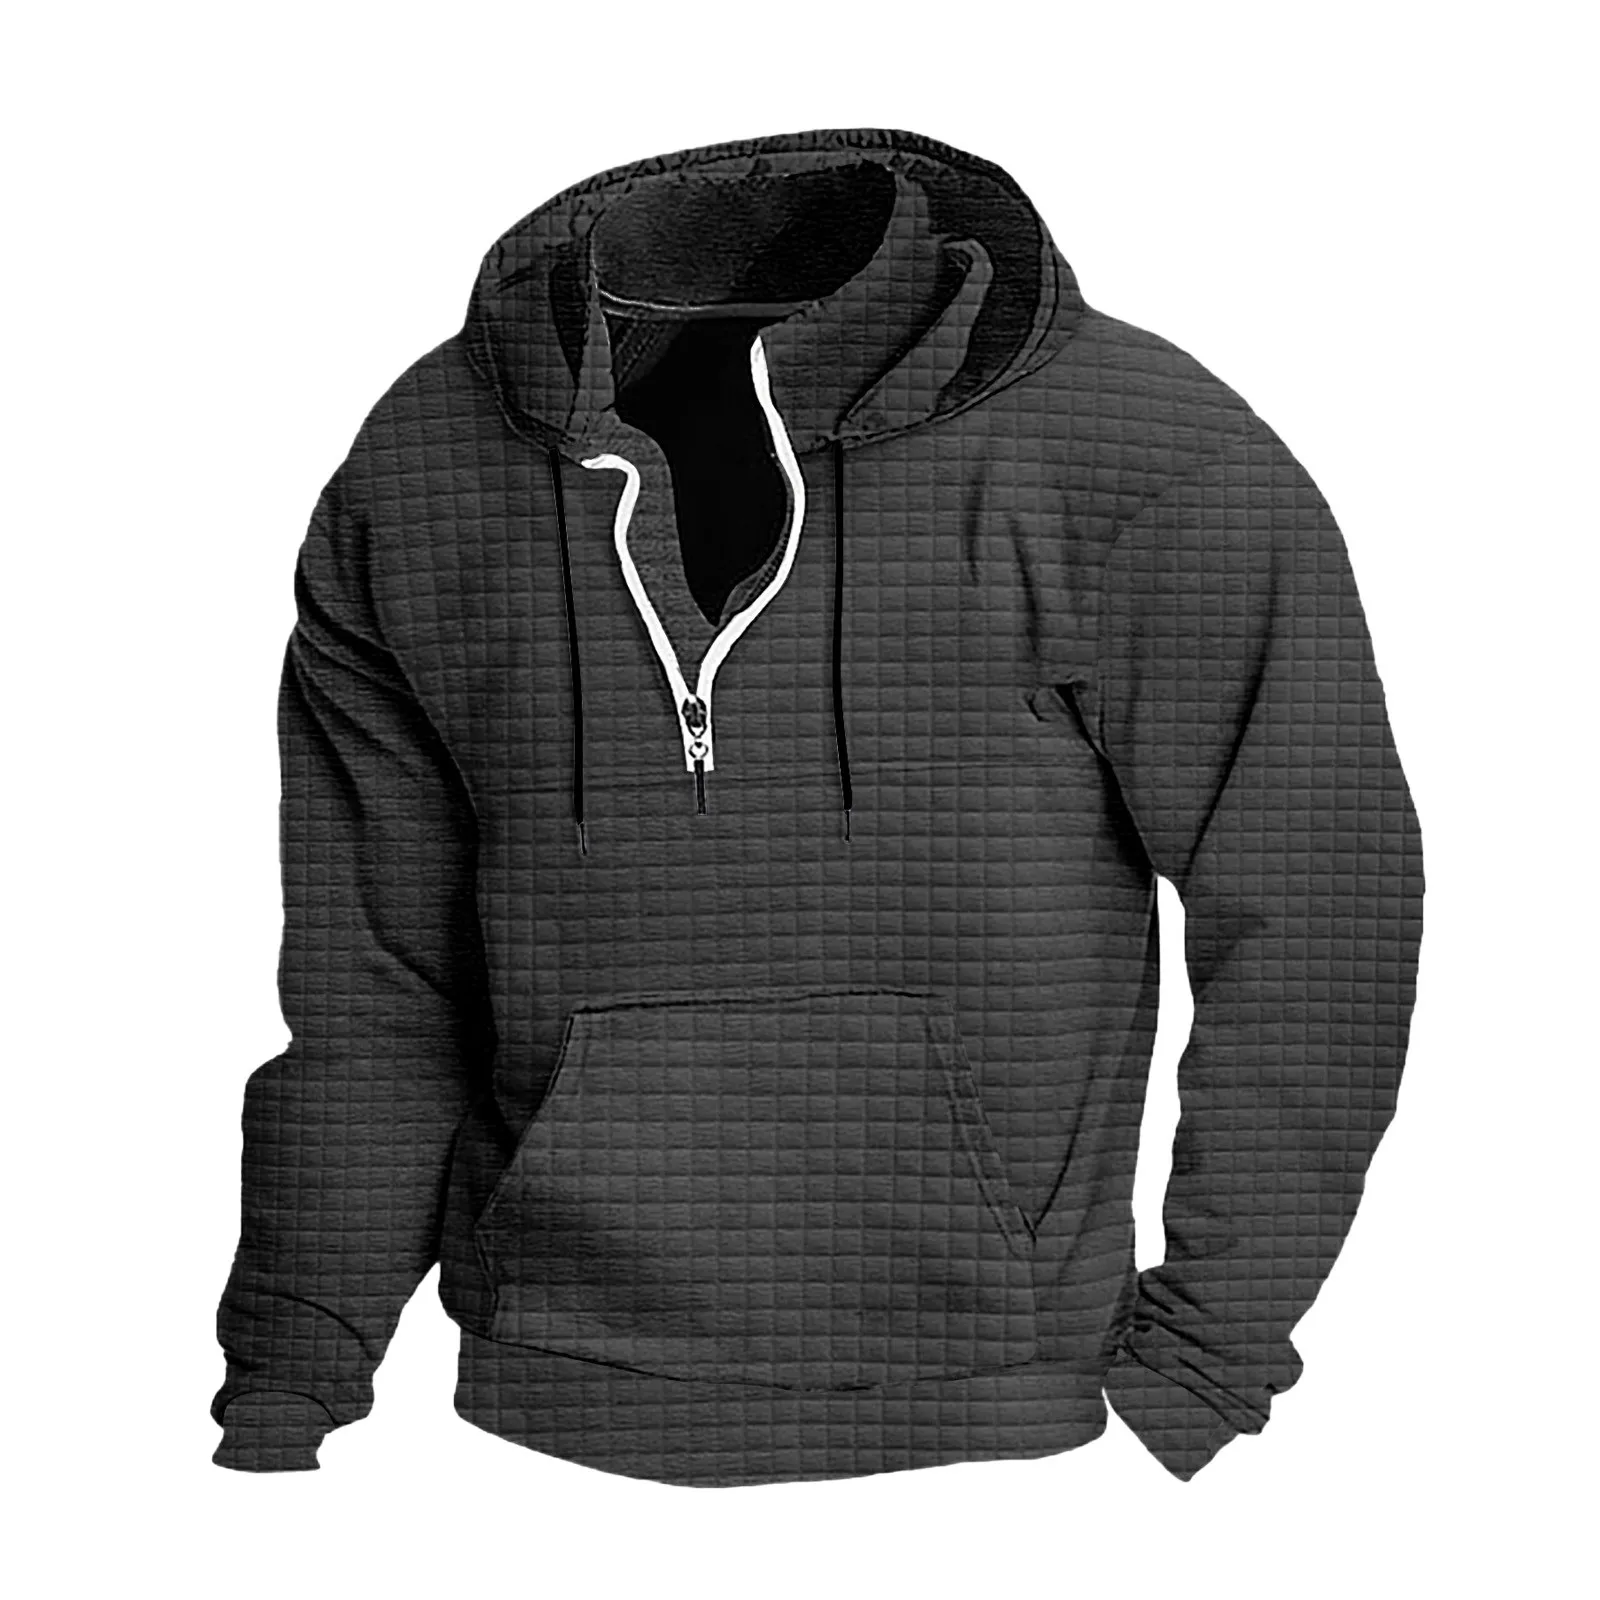 

Men Stand Zipper Neck Checkered Hoodie With Pockets Long Sleeve Hoodie Europe And The United States Casual U of I Sweatshirt